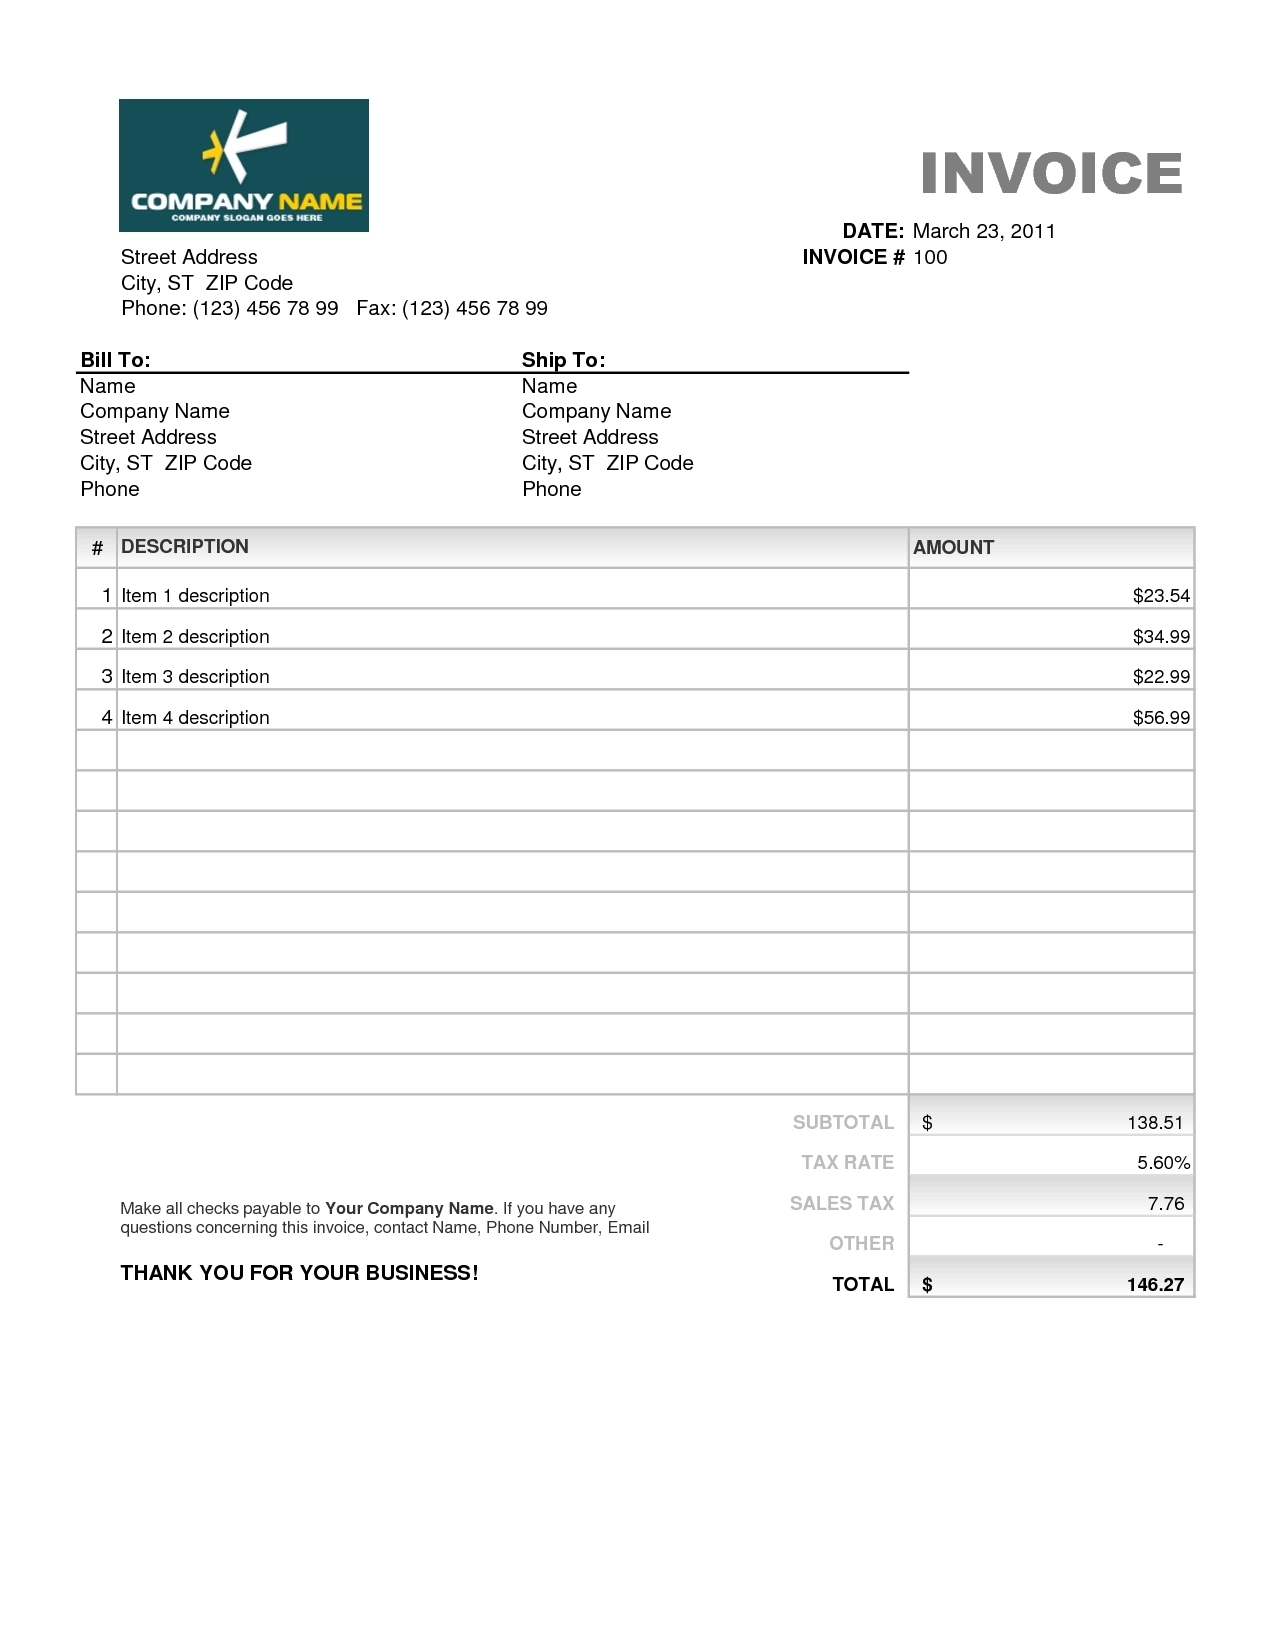 invoice excel template free download invoice template ideas excel invoice templates free download